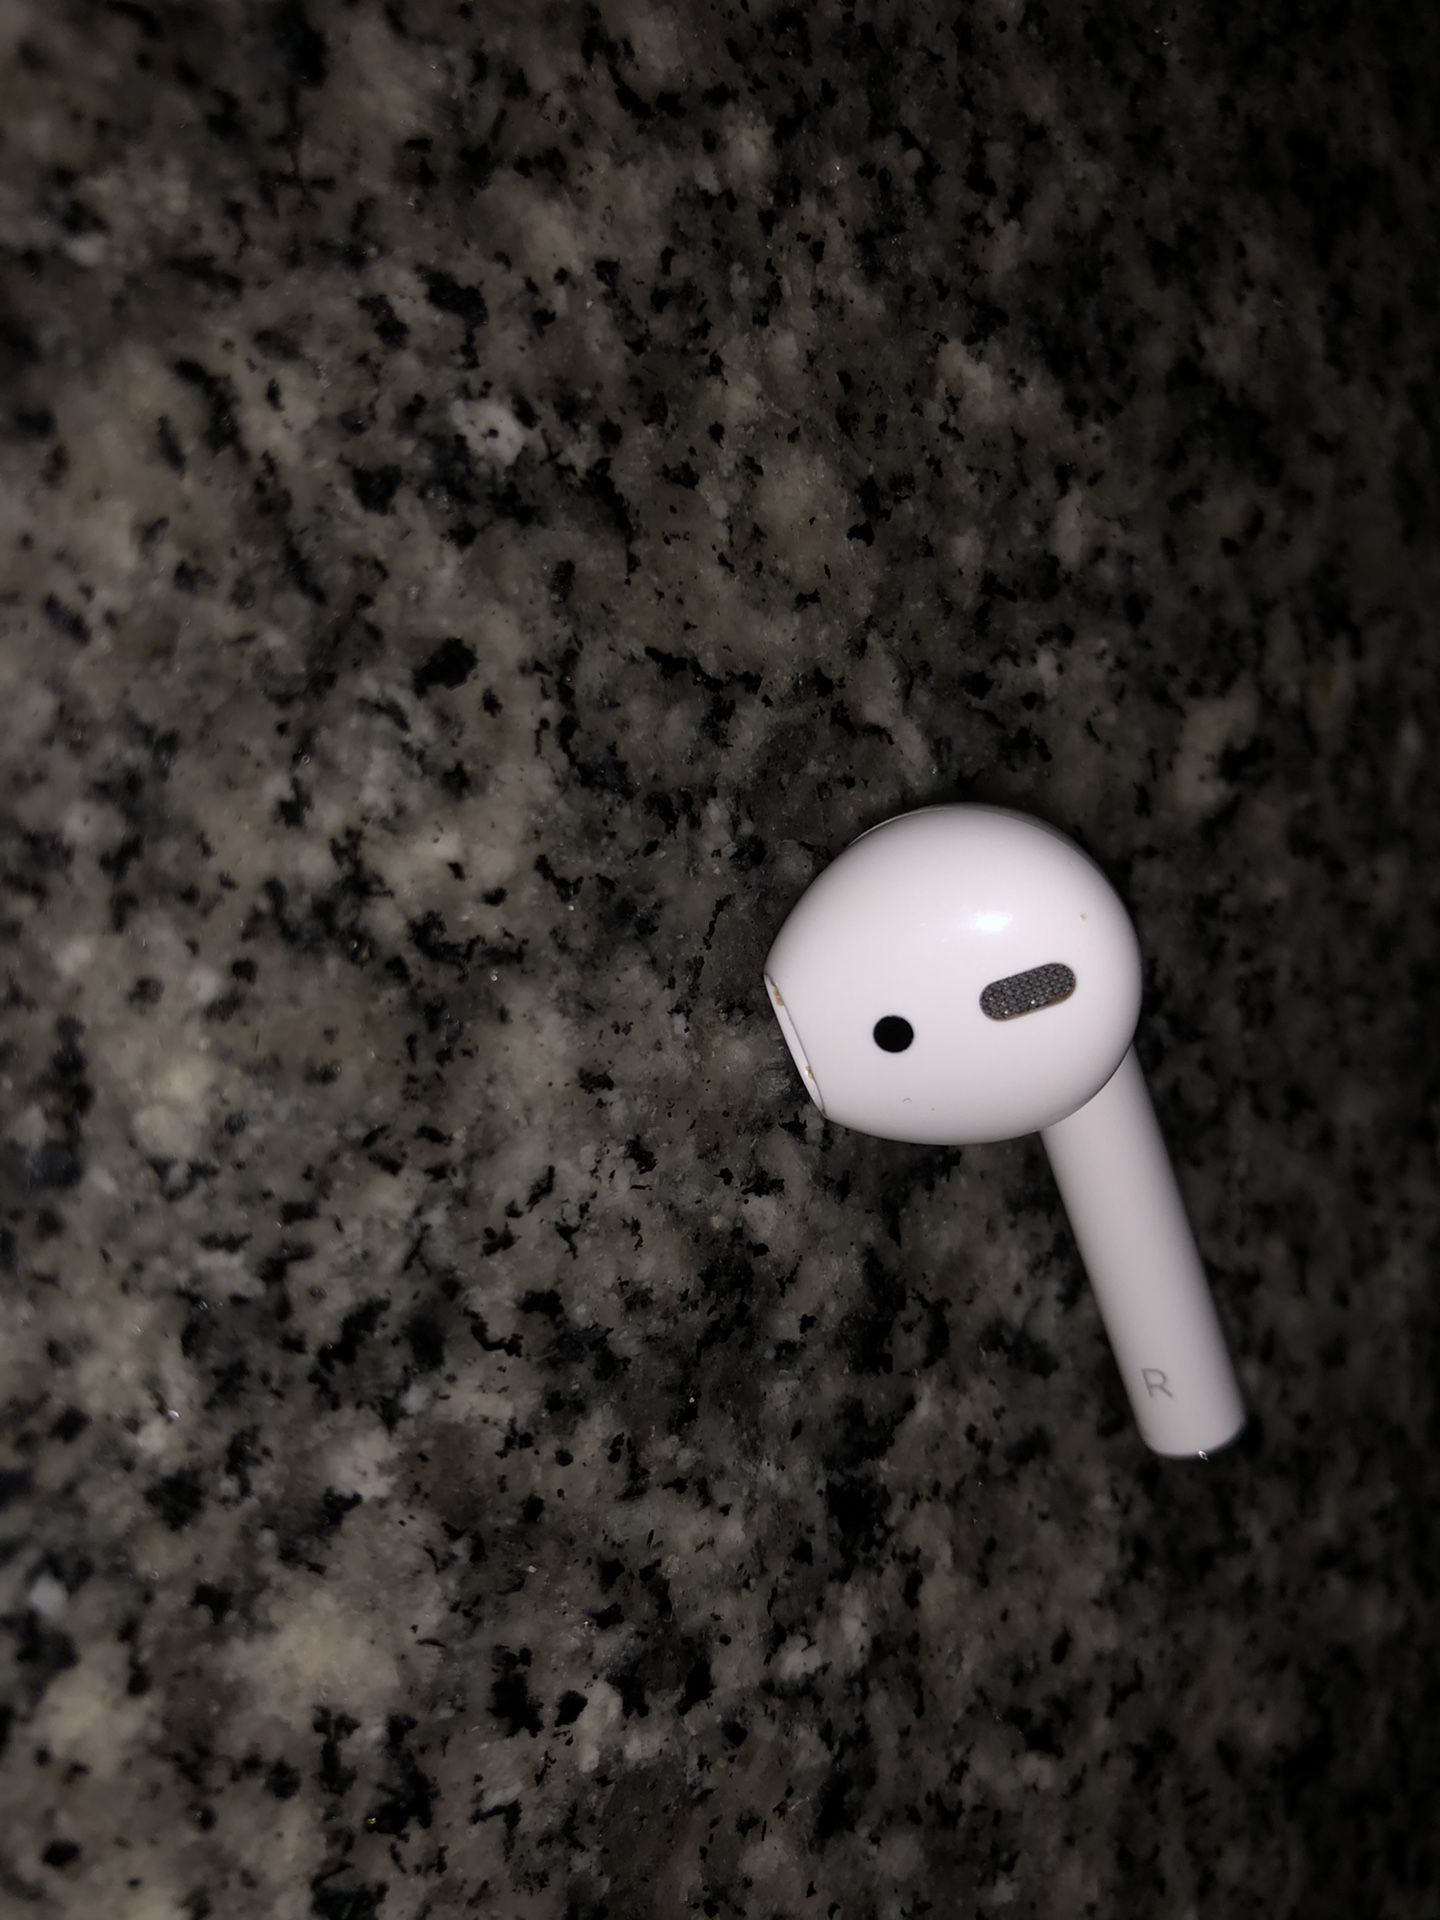 AirPod 1st gen (right AirPod only)